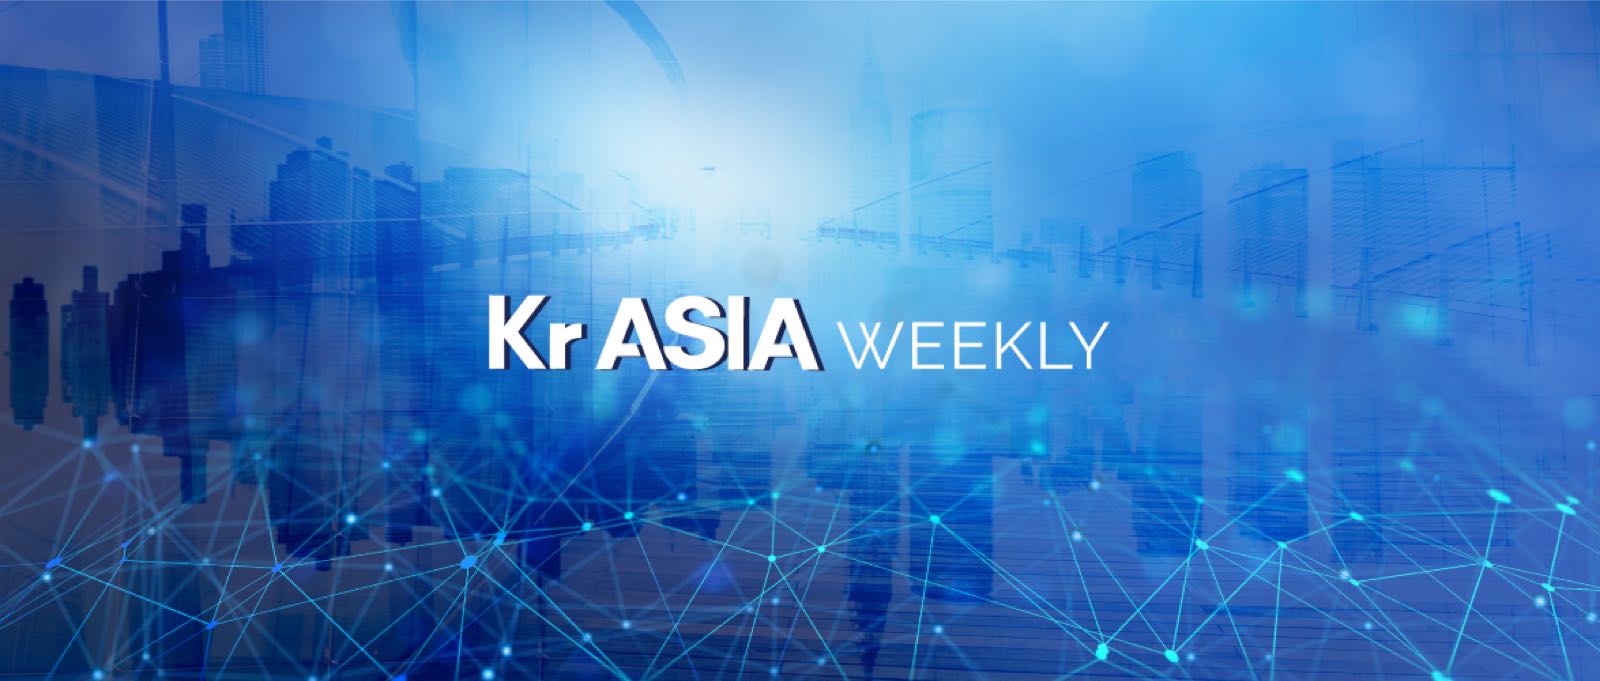 KrASIA Weekly: Grab and Ovo are tapping into financial services, Lazada is upgrading facilities to give better shopping experience